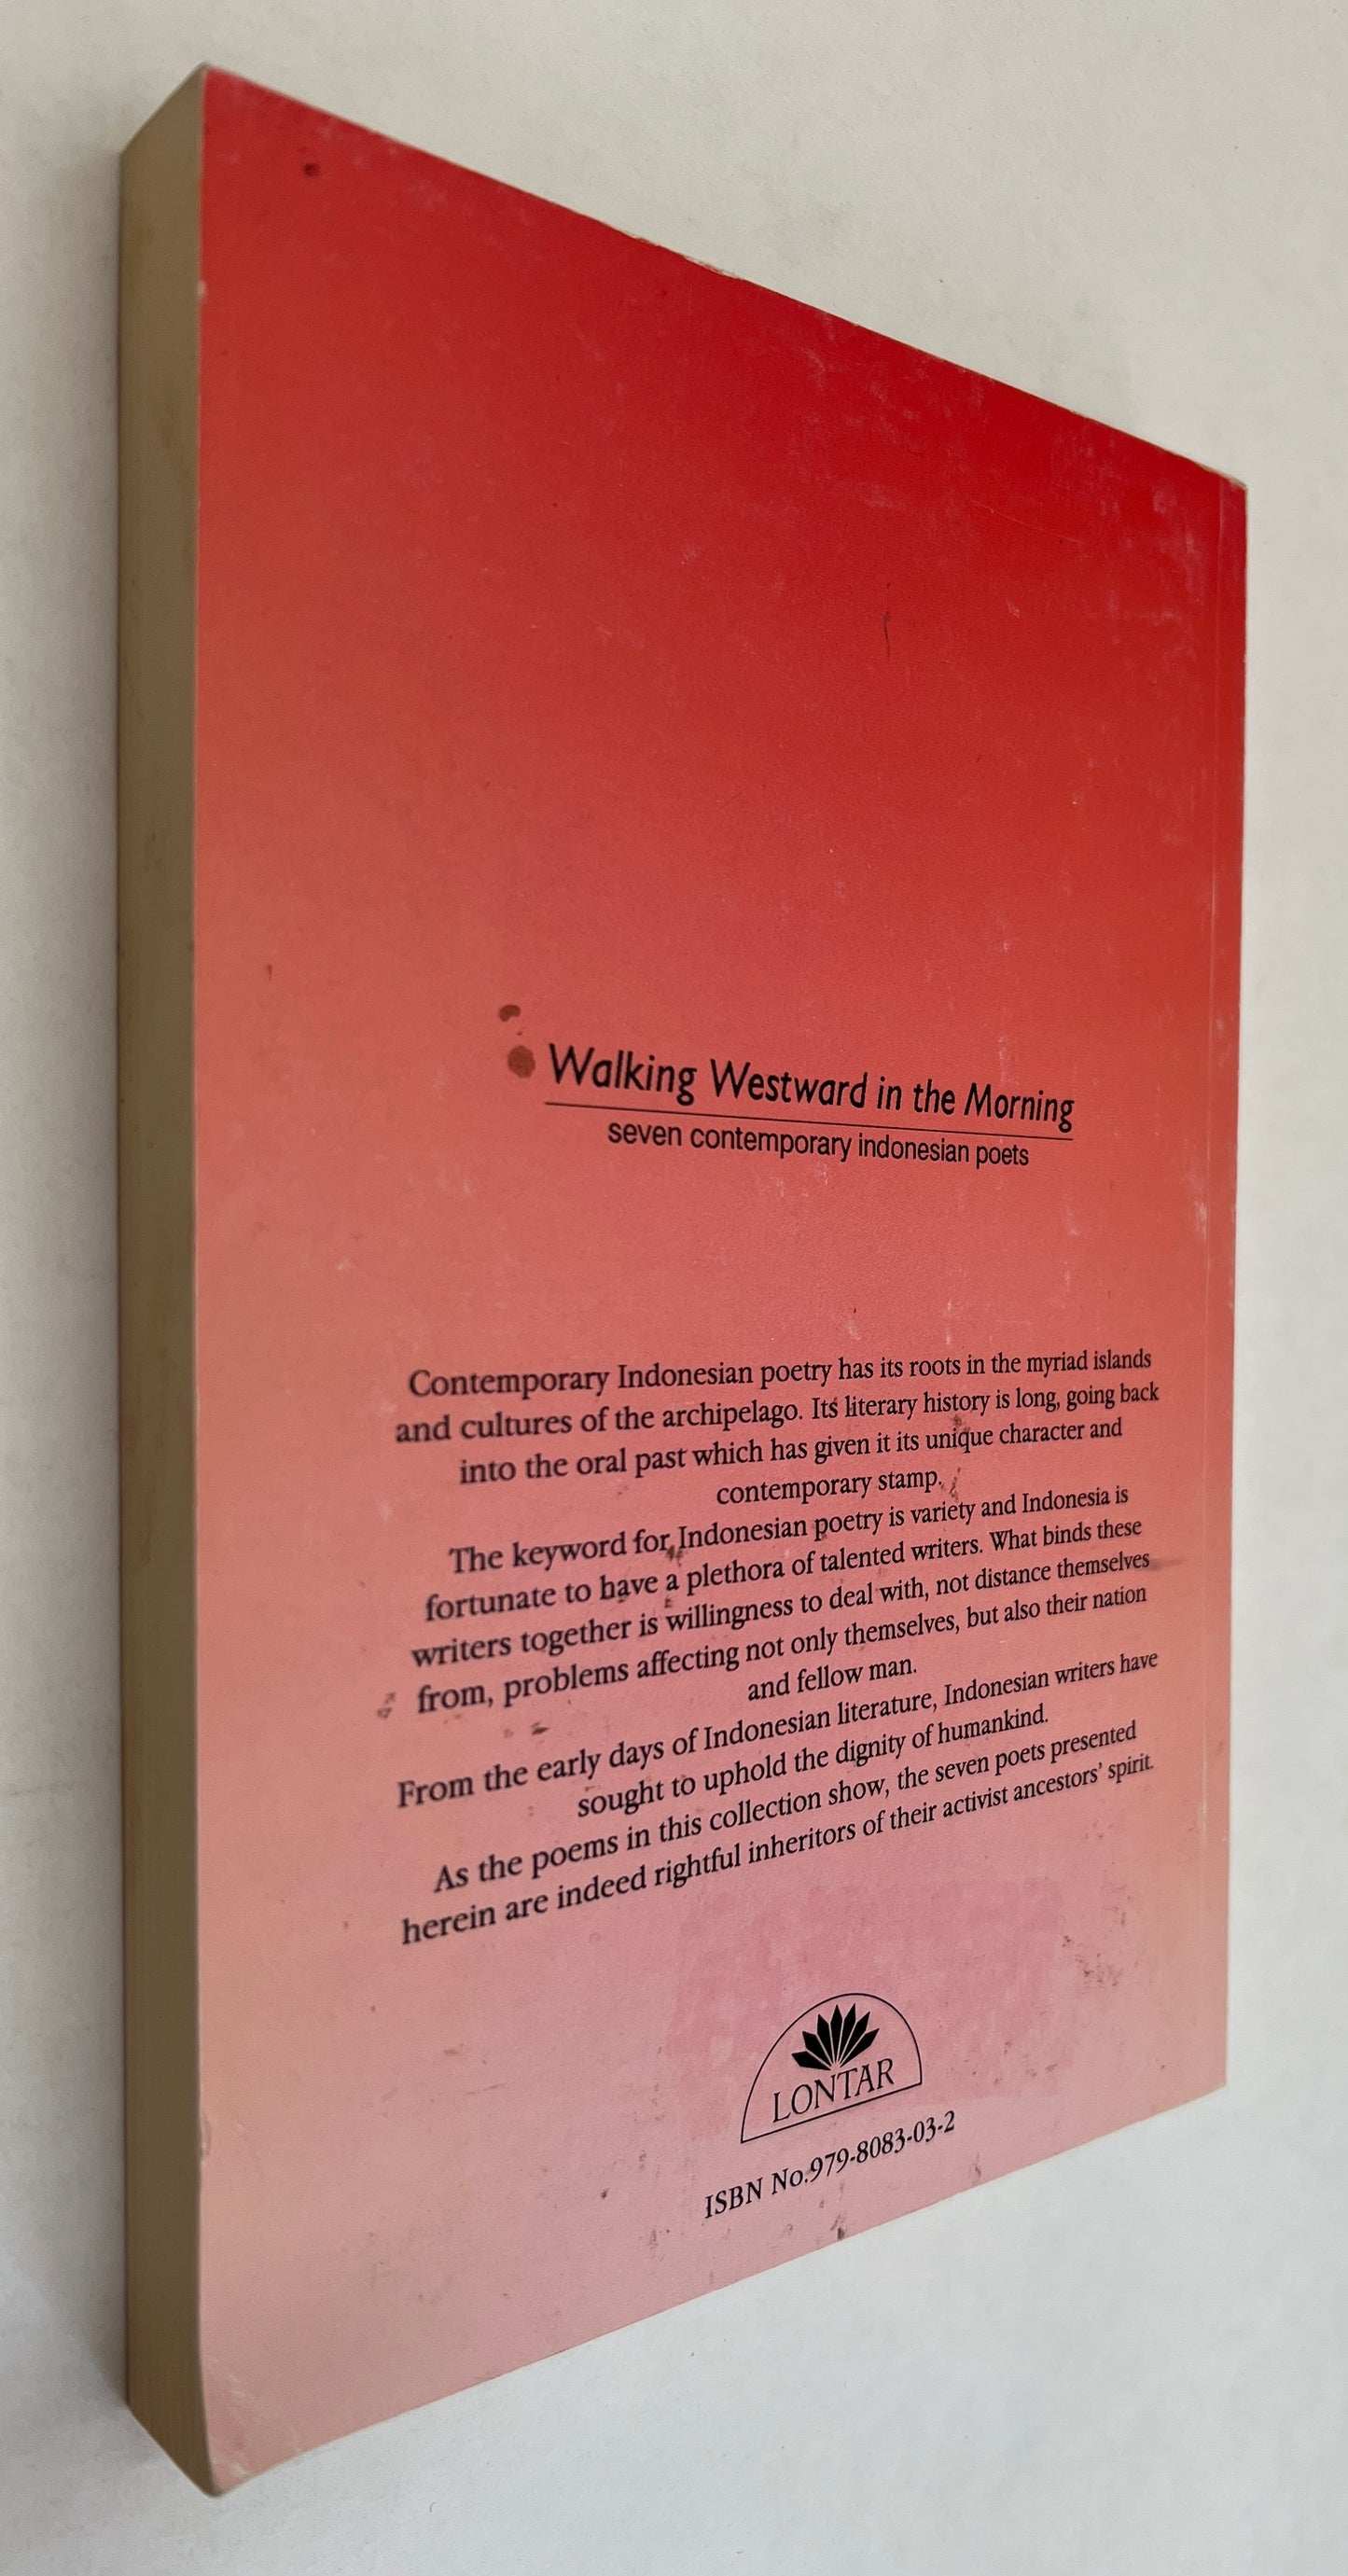 Walking Westward in the Morning: Seven Contemporary Indonesian Poets